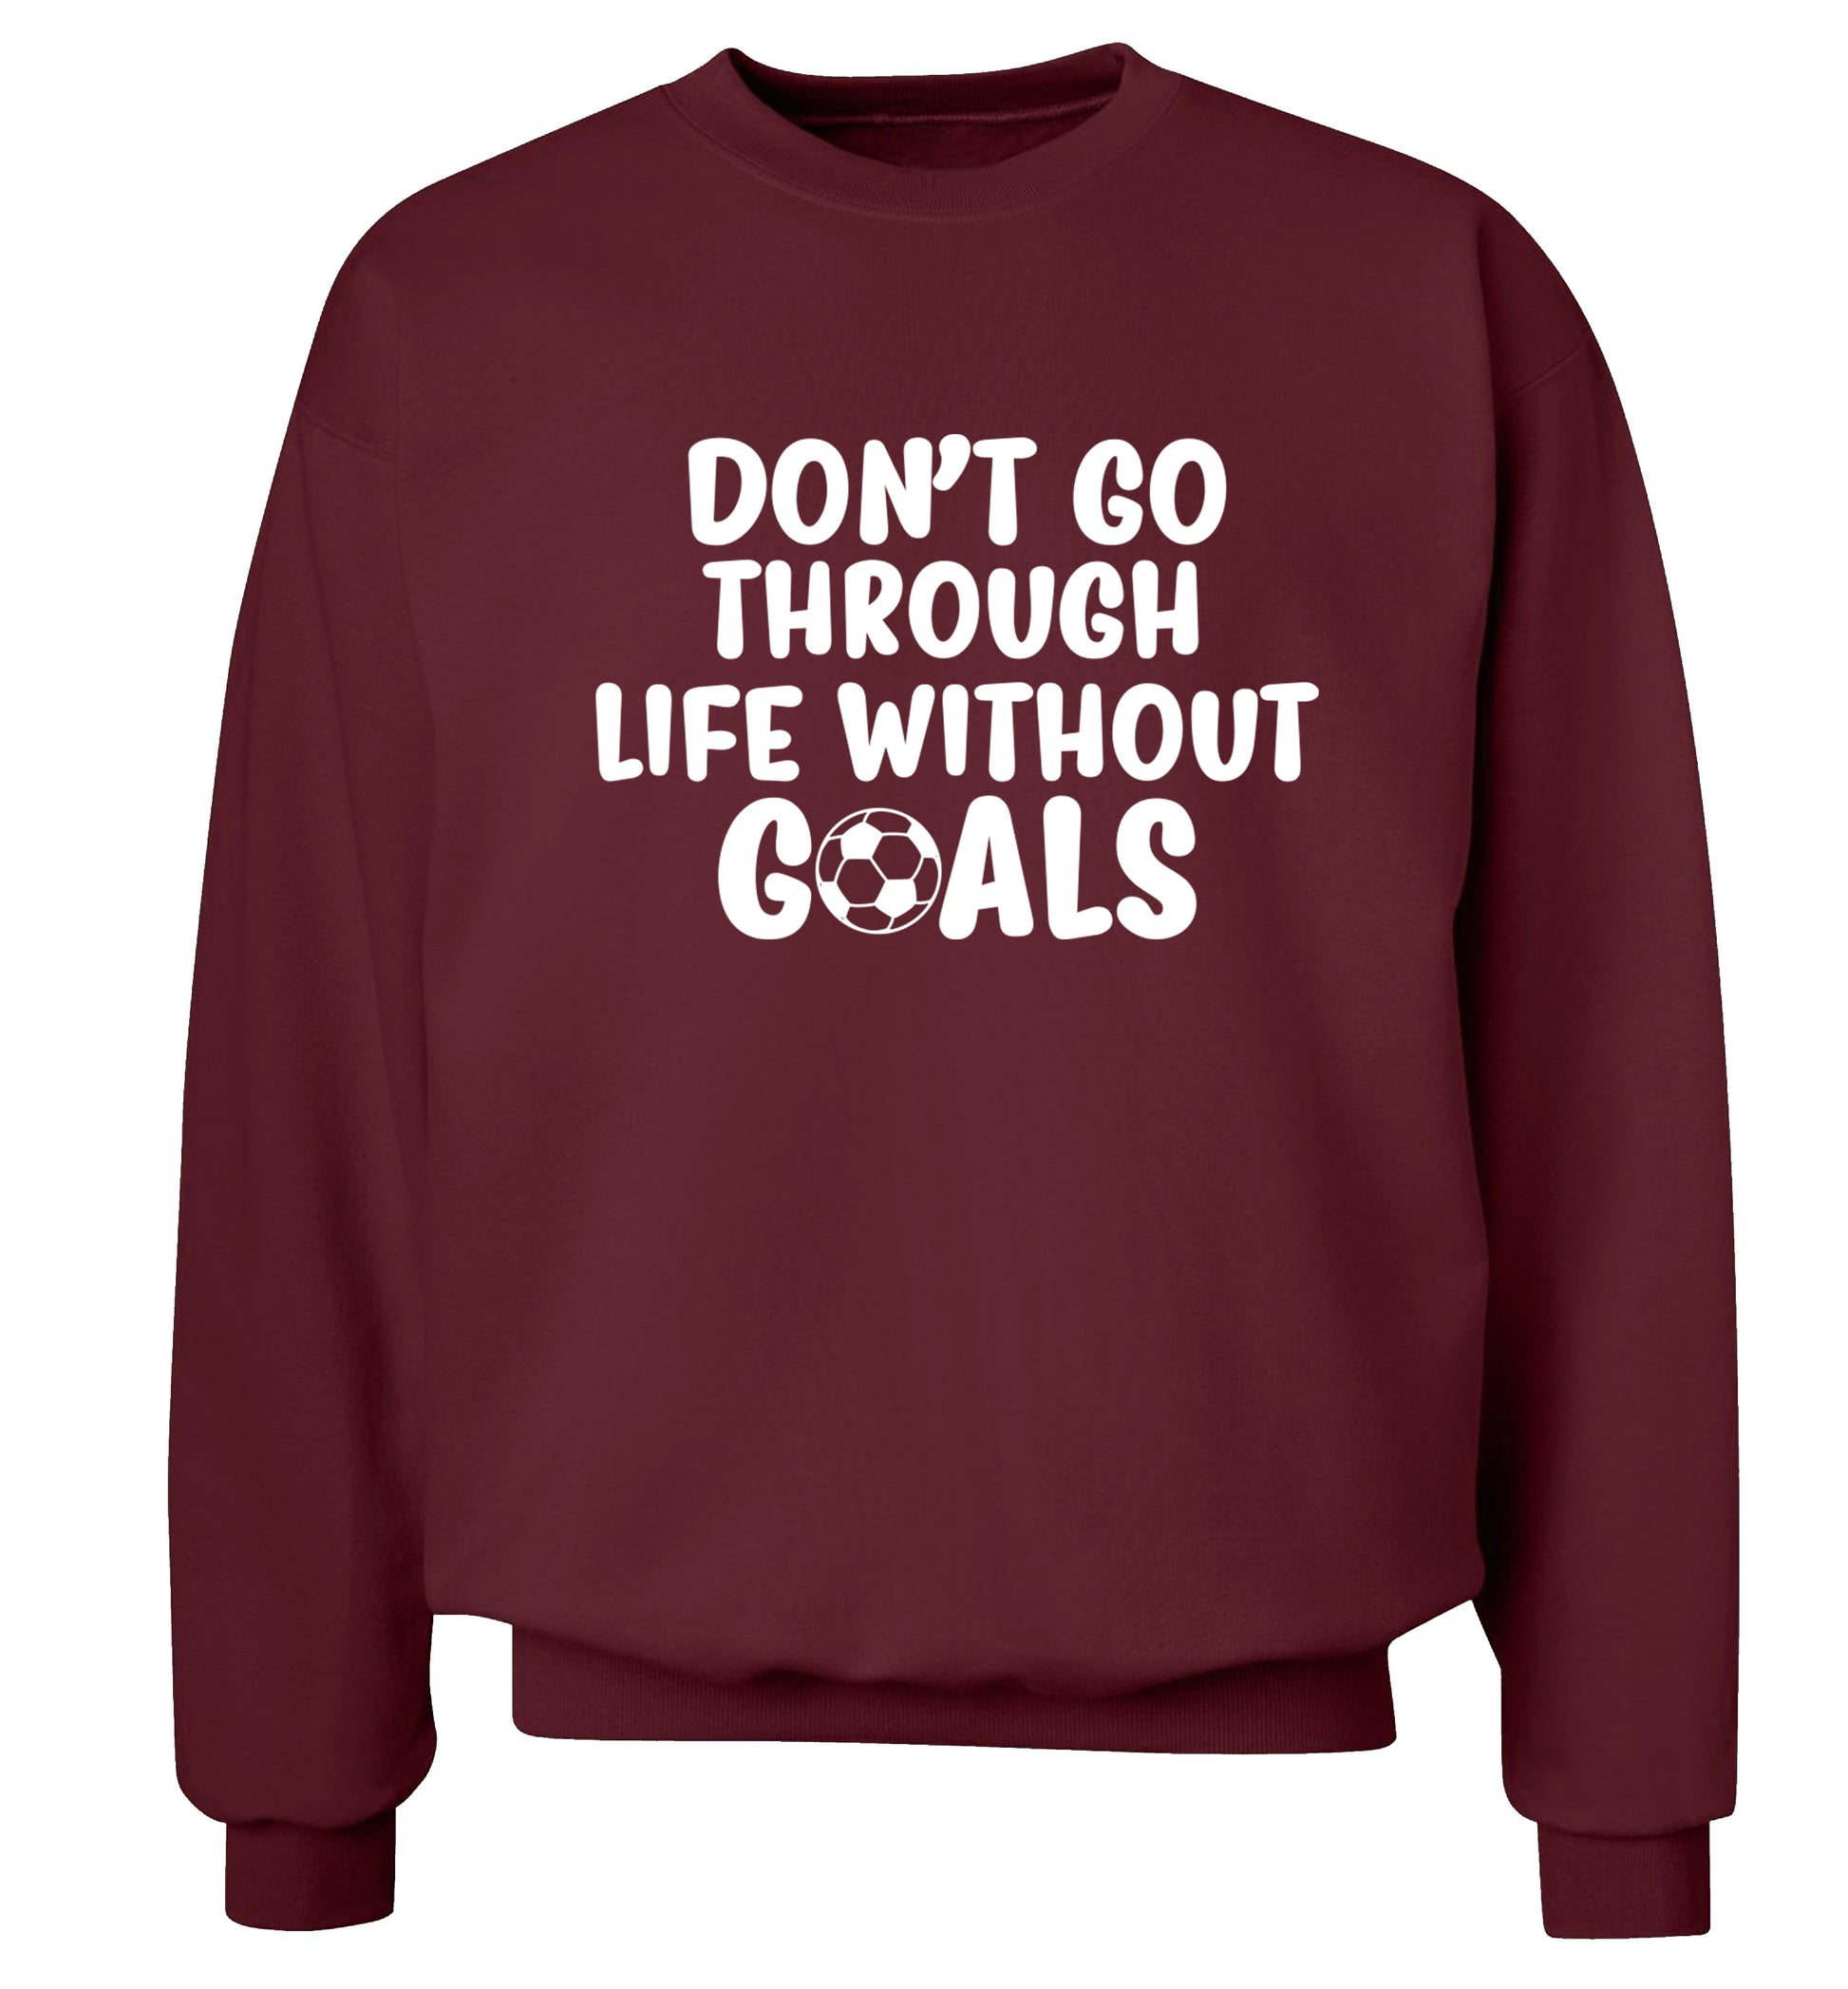 Don't go through life without goals Adult's unisexmaroon Sweater 2XL